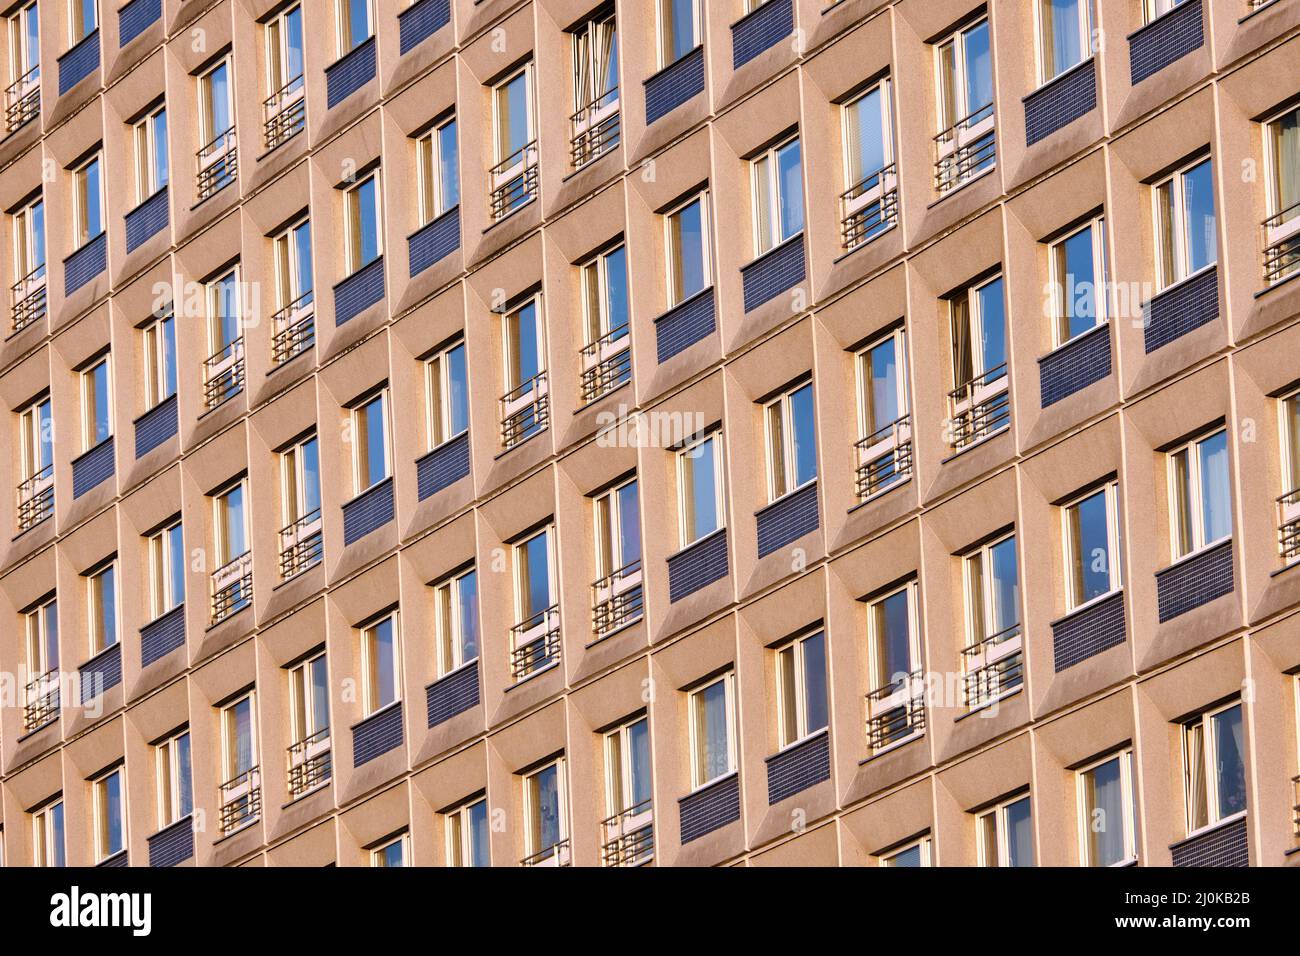 Facade of a typical precast apartment building in the former eastern part of Berlin, Germany Stock Photo